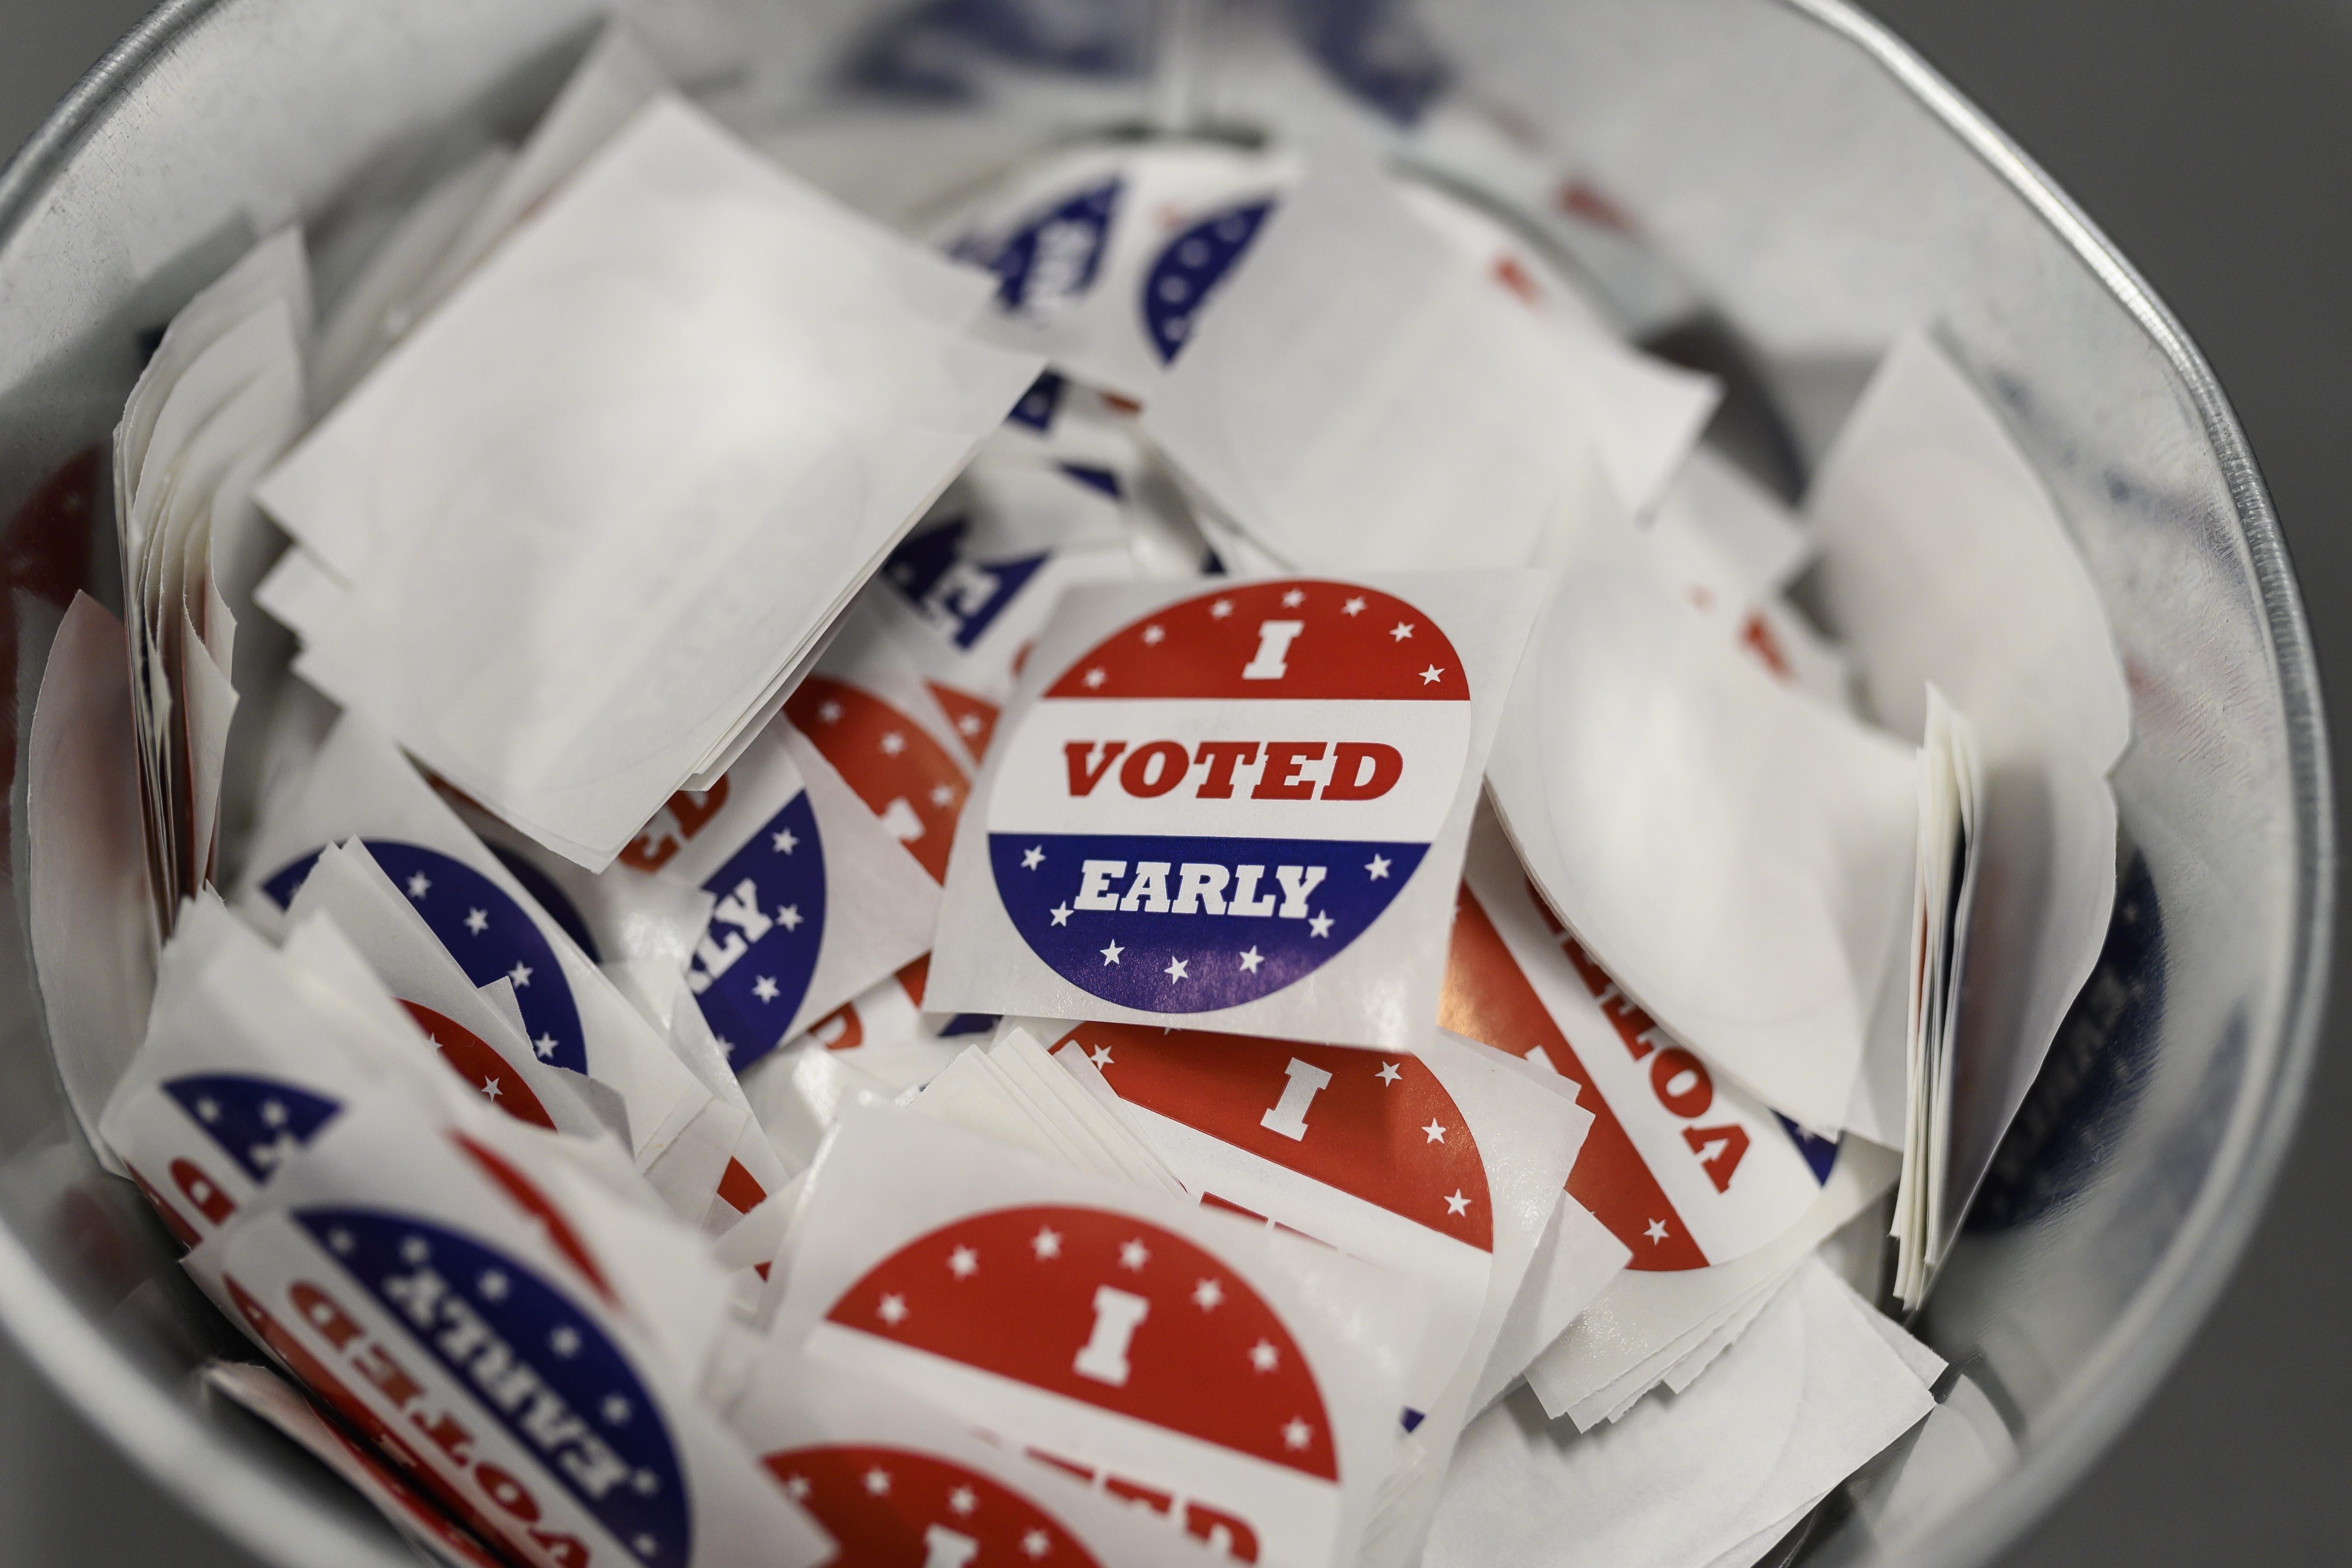 A bucket of "I Voted Early" stickers. 